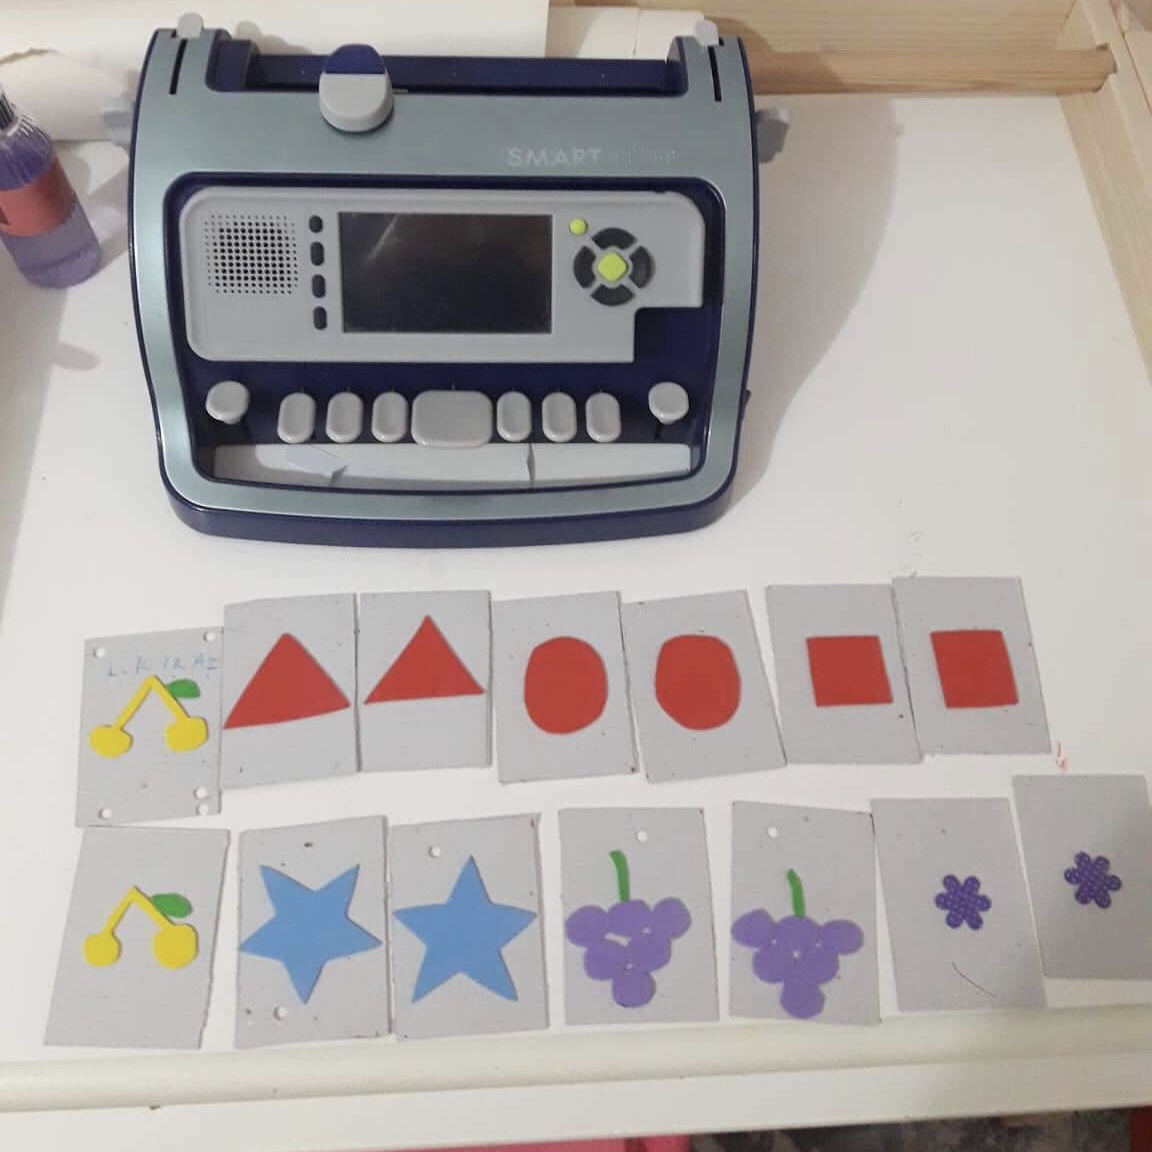 A Smart Brailler in the background with shape matching cards in the foreground